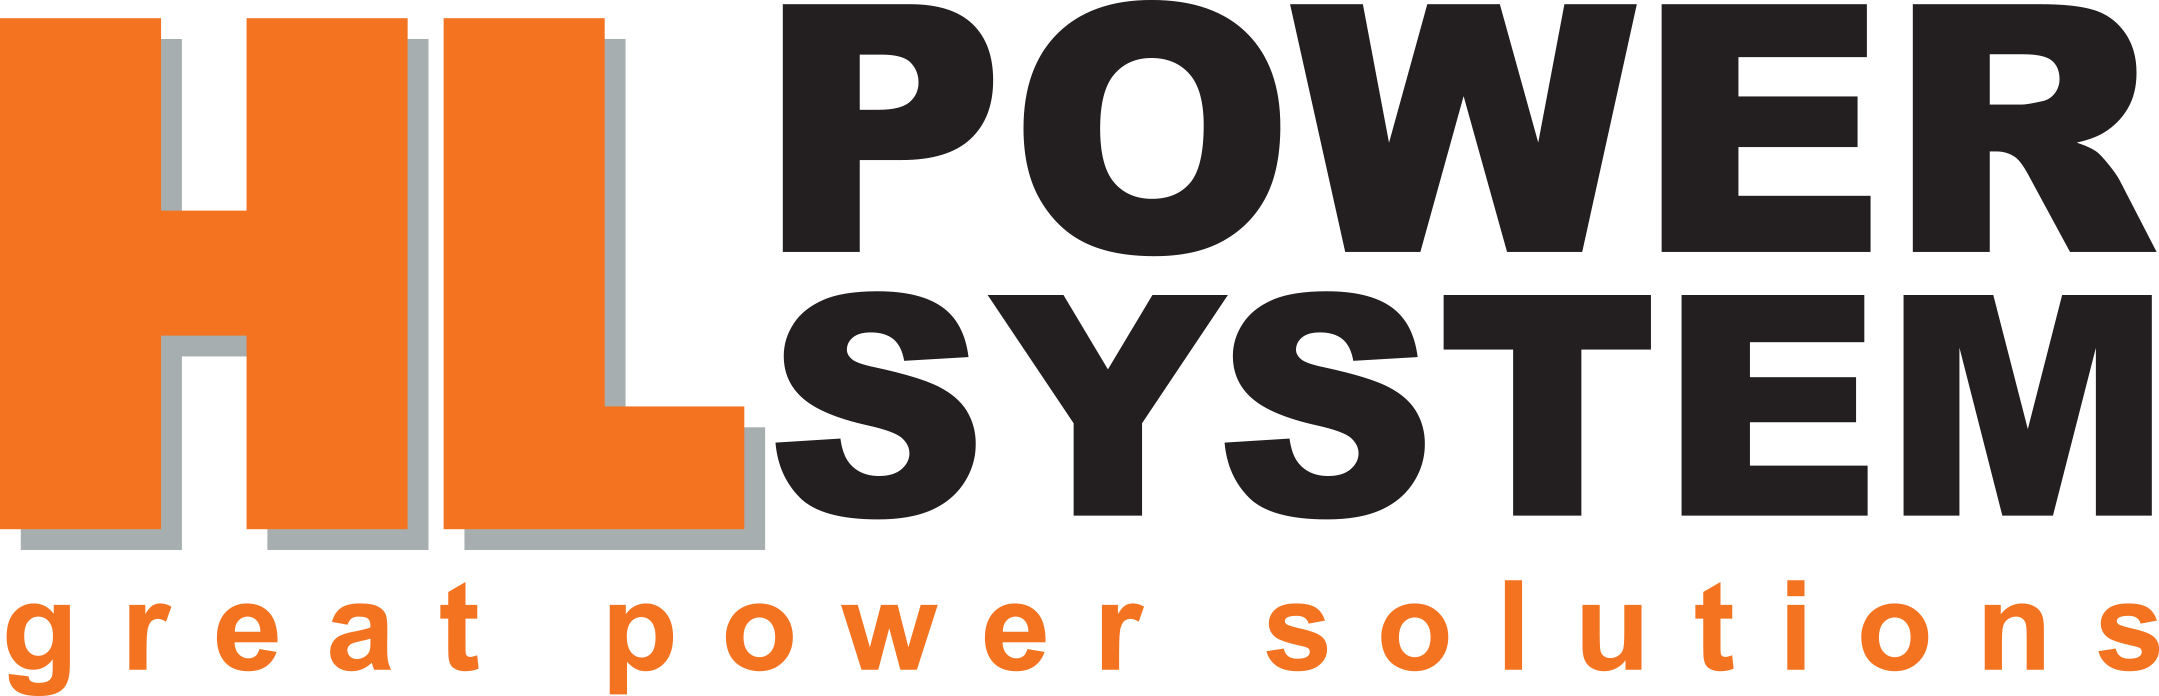 HL Power Systems